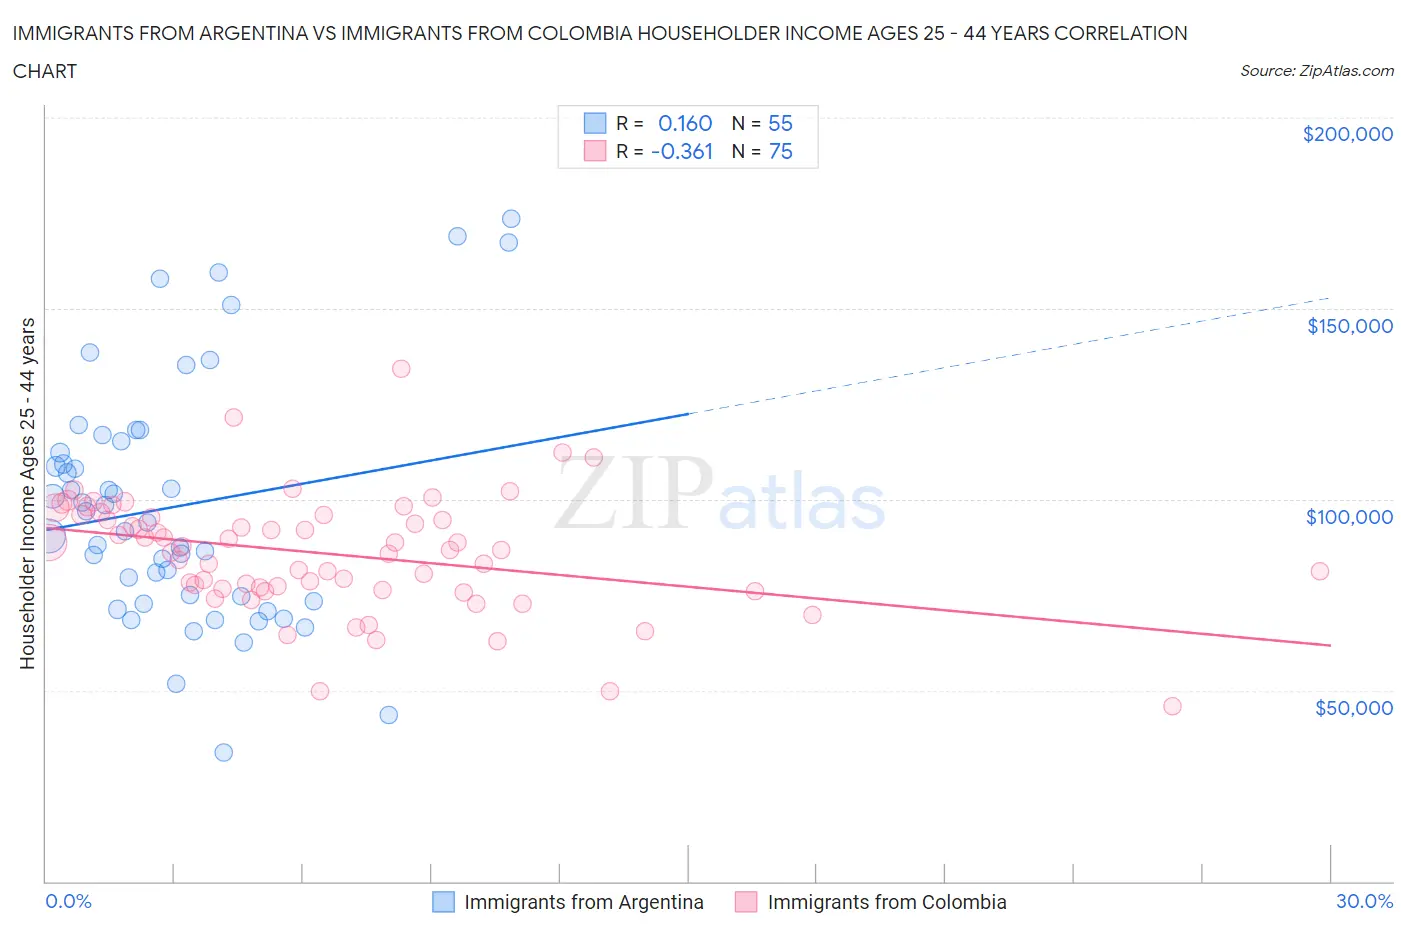 Immigrants from Argentina vs Immigrants from Colombia Householder Income Ages 25 - 44 years